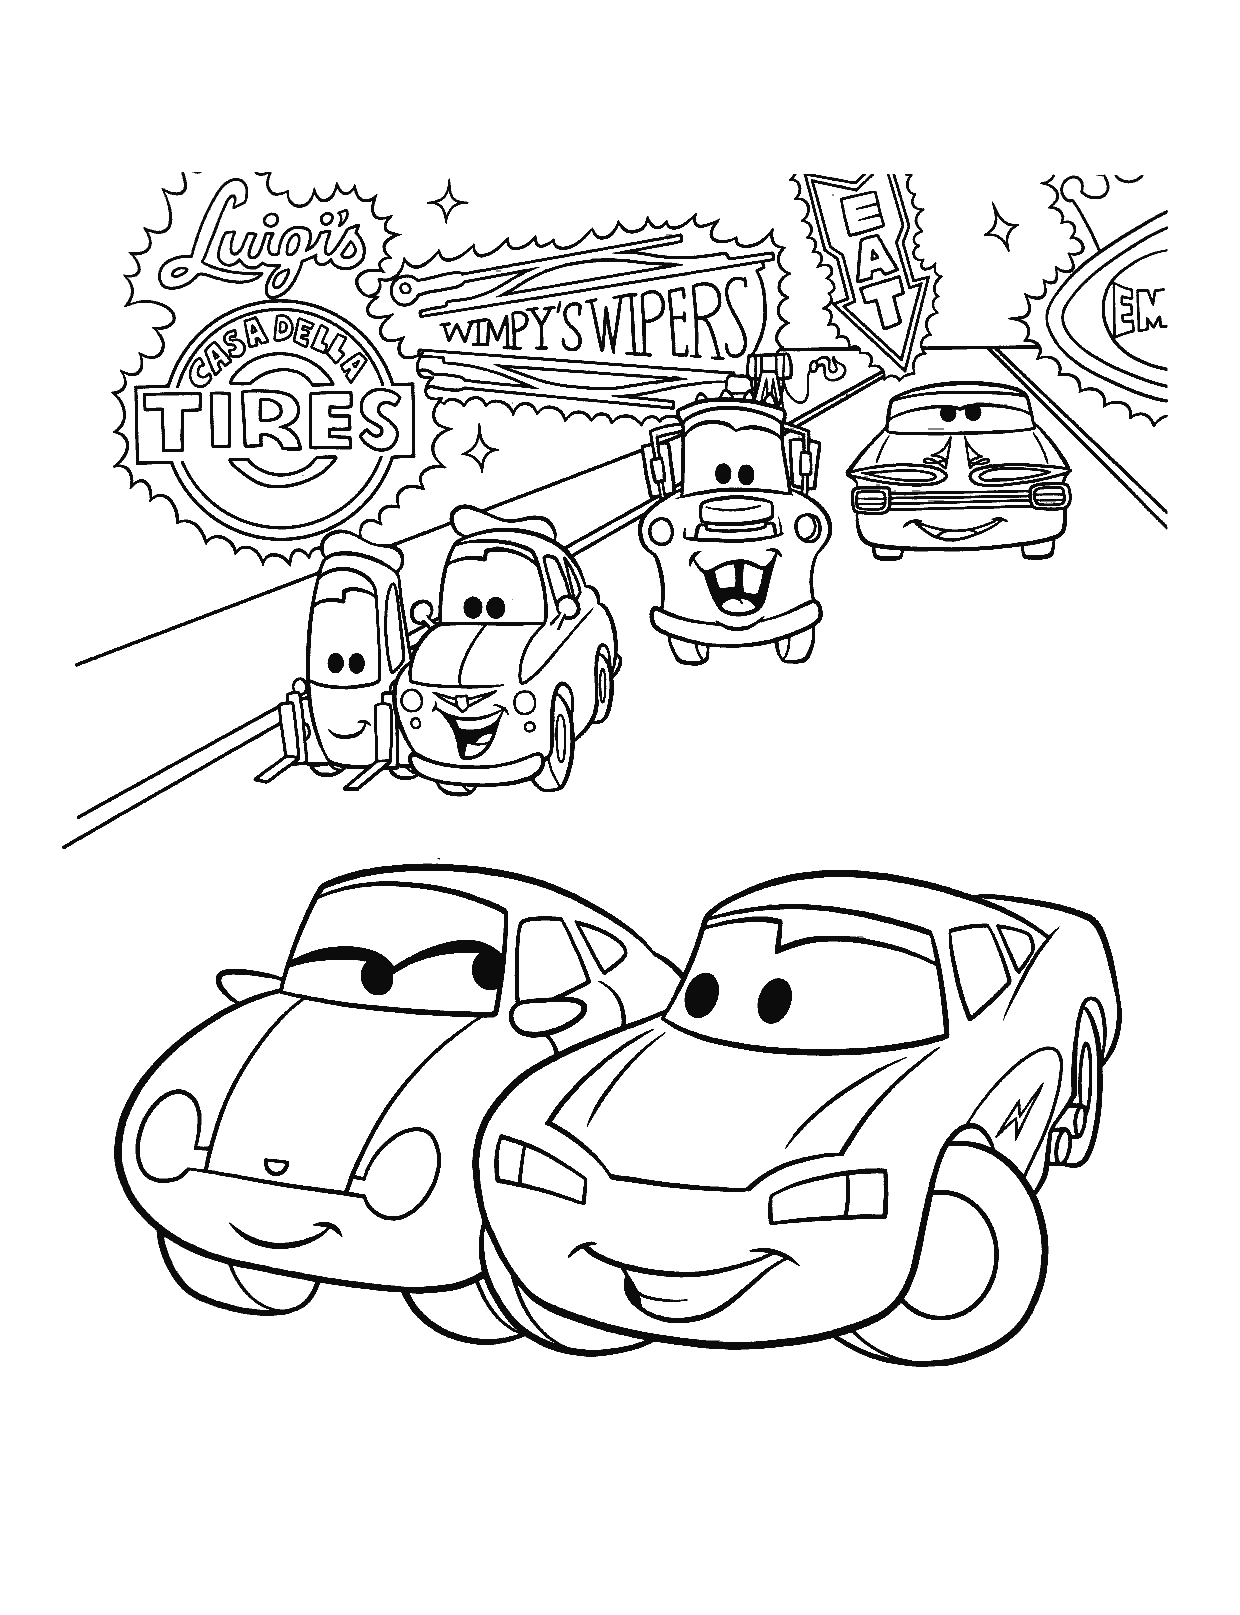 Free Disney Cars Coloring Pages , Download Free Disney Cars ...